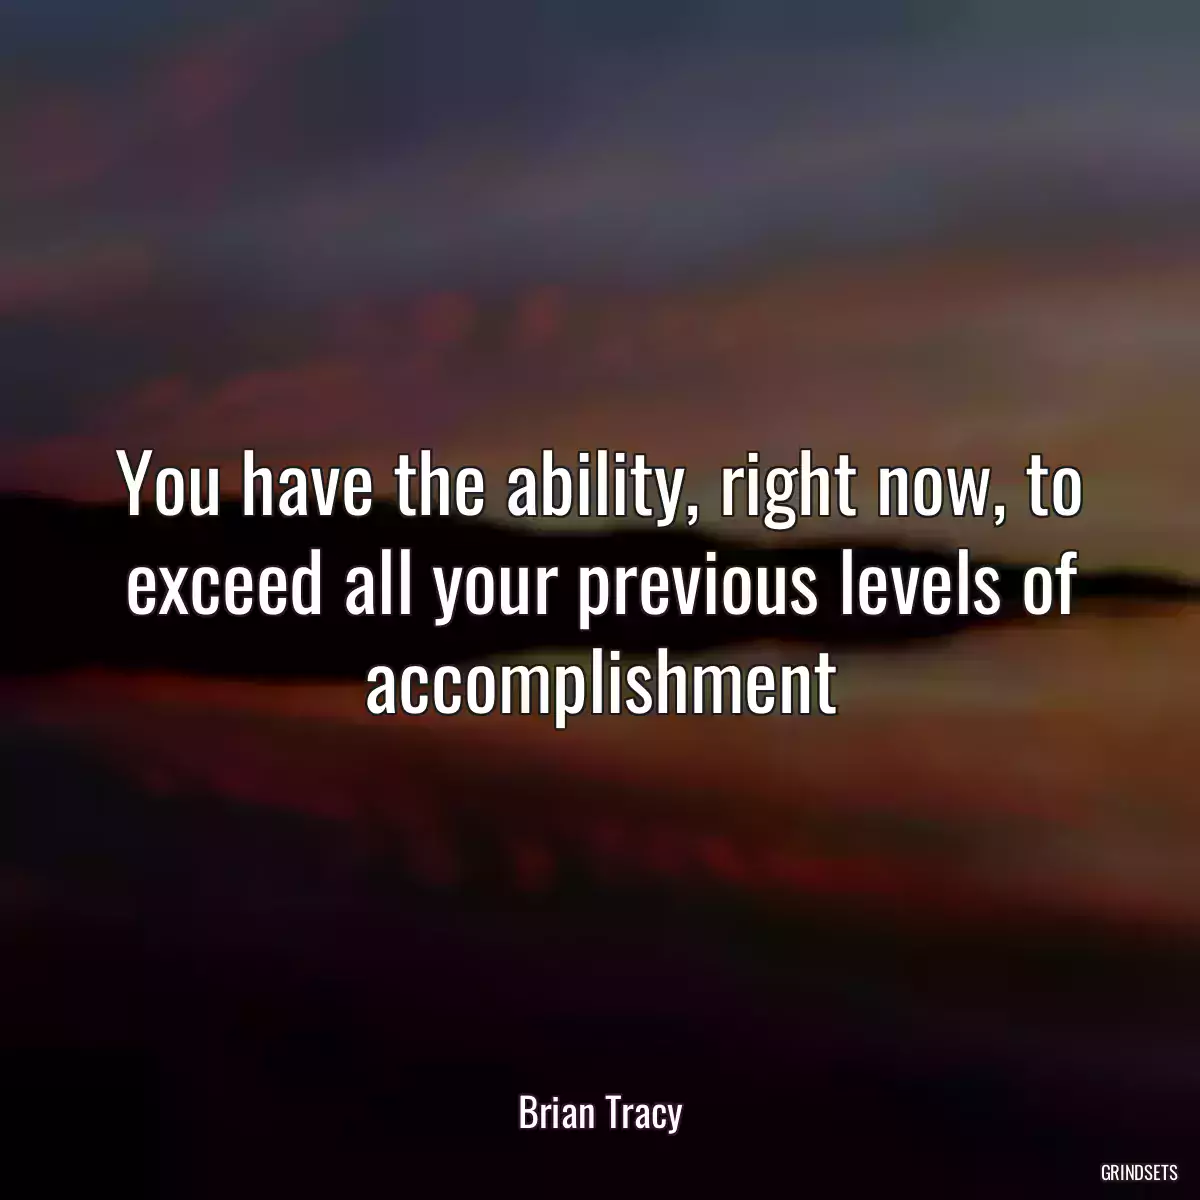 You have the ability, right now, to exceed all your previous levels of accomplishment